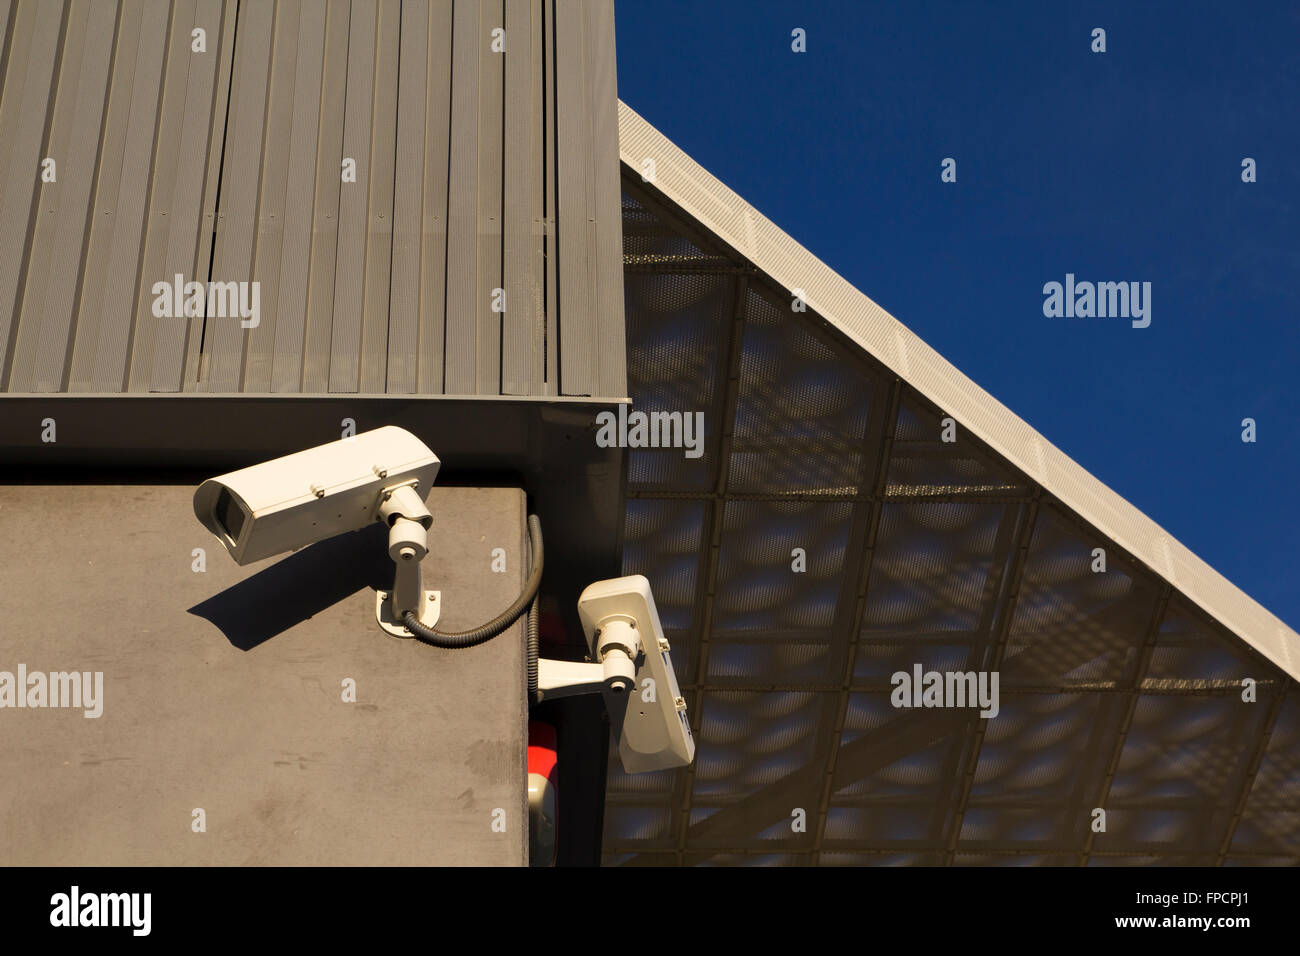 Security camera in a modern building, for video surveillance Stock Photo